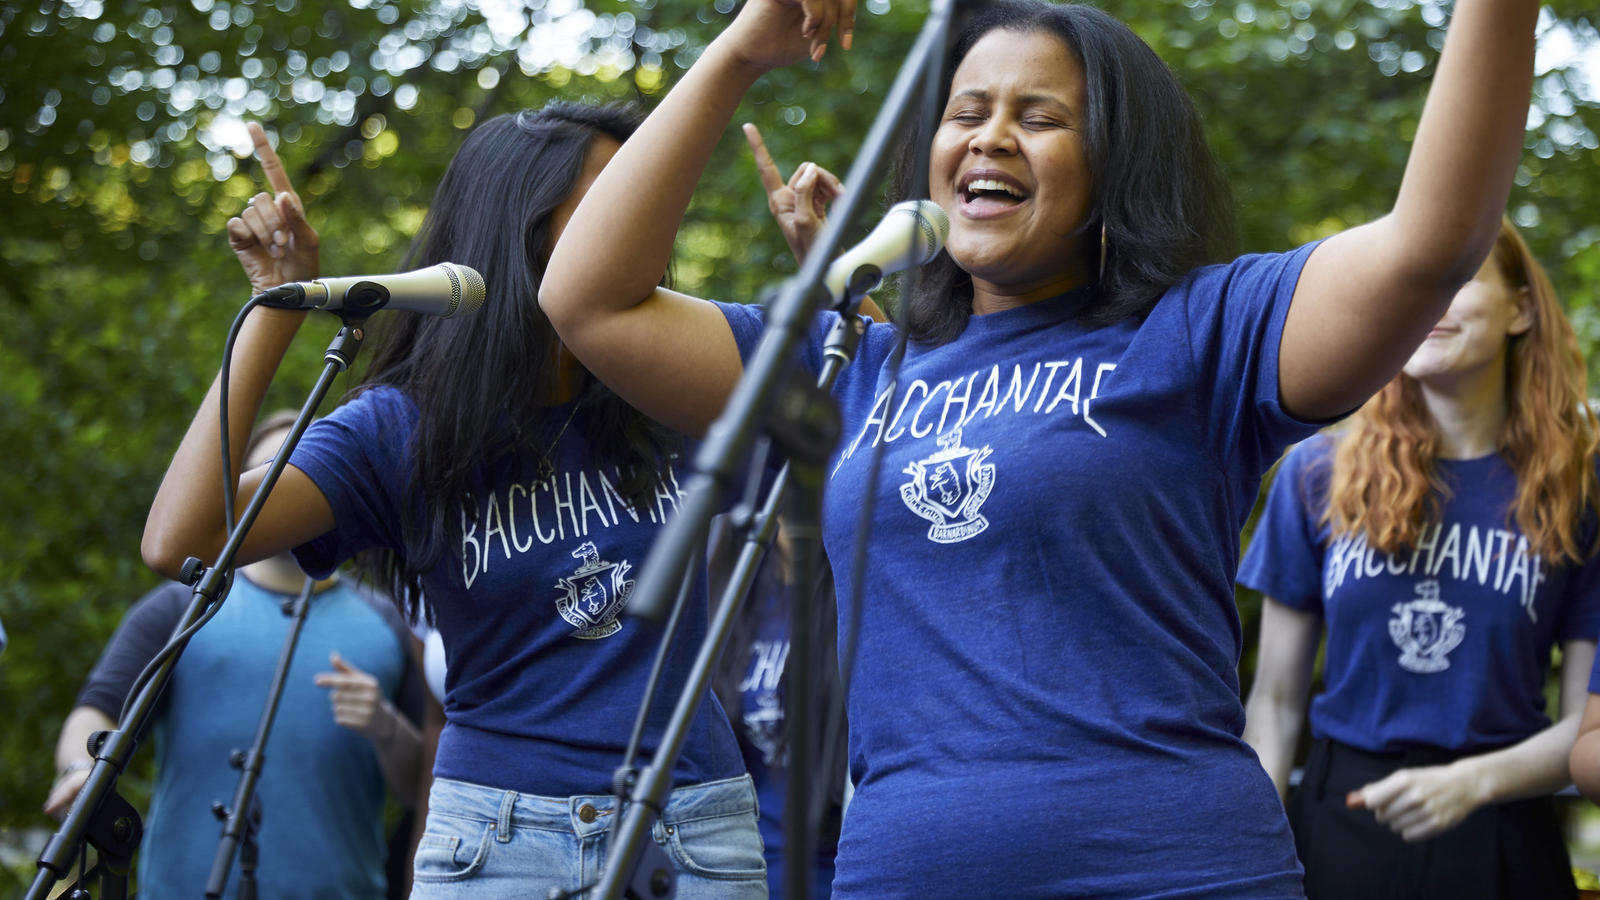 A young Black woman sings outdoors as part of the Bacchantae performance